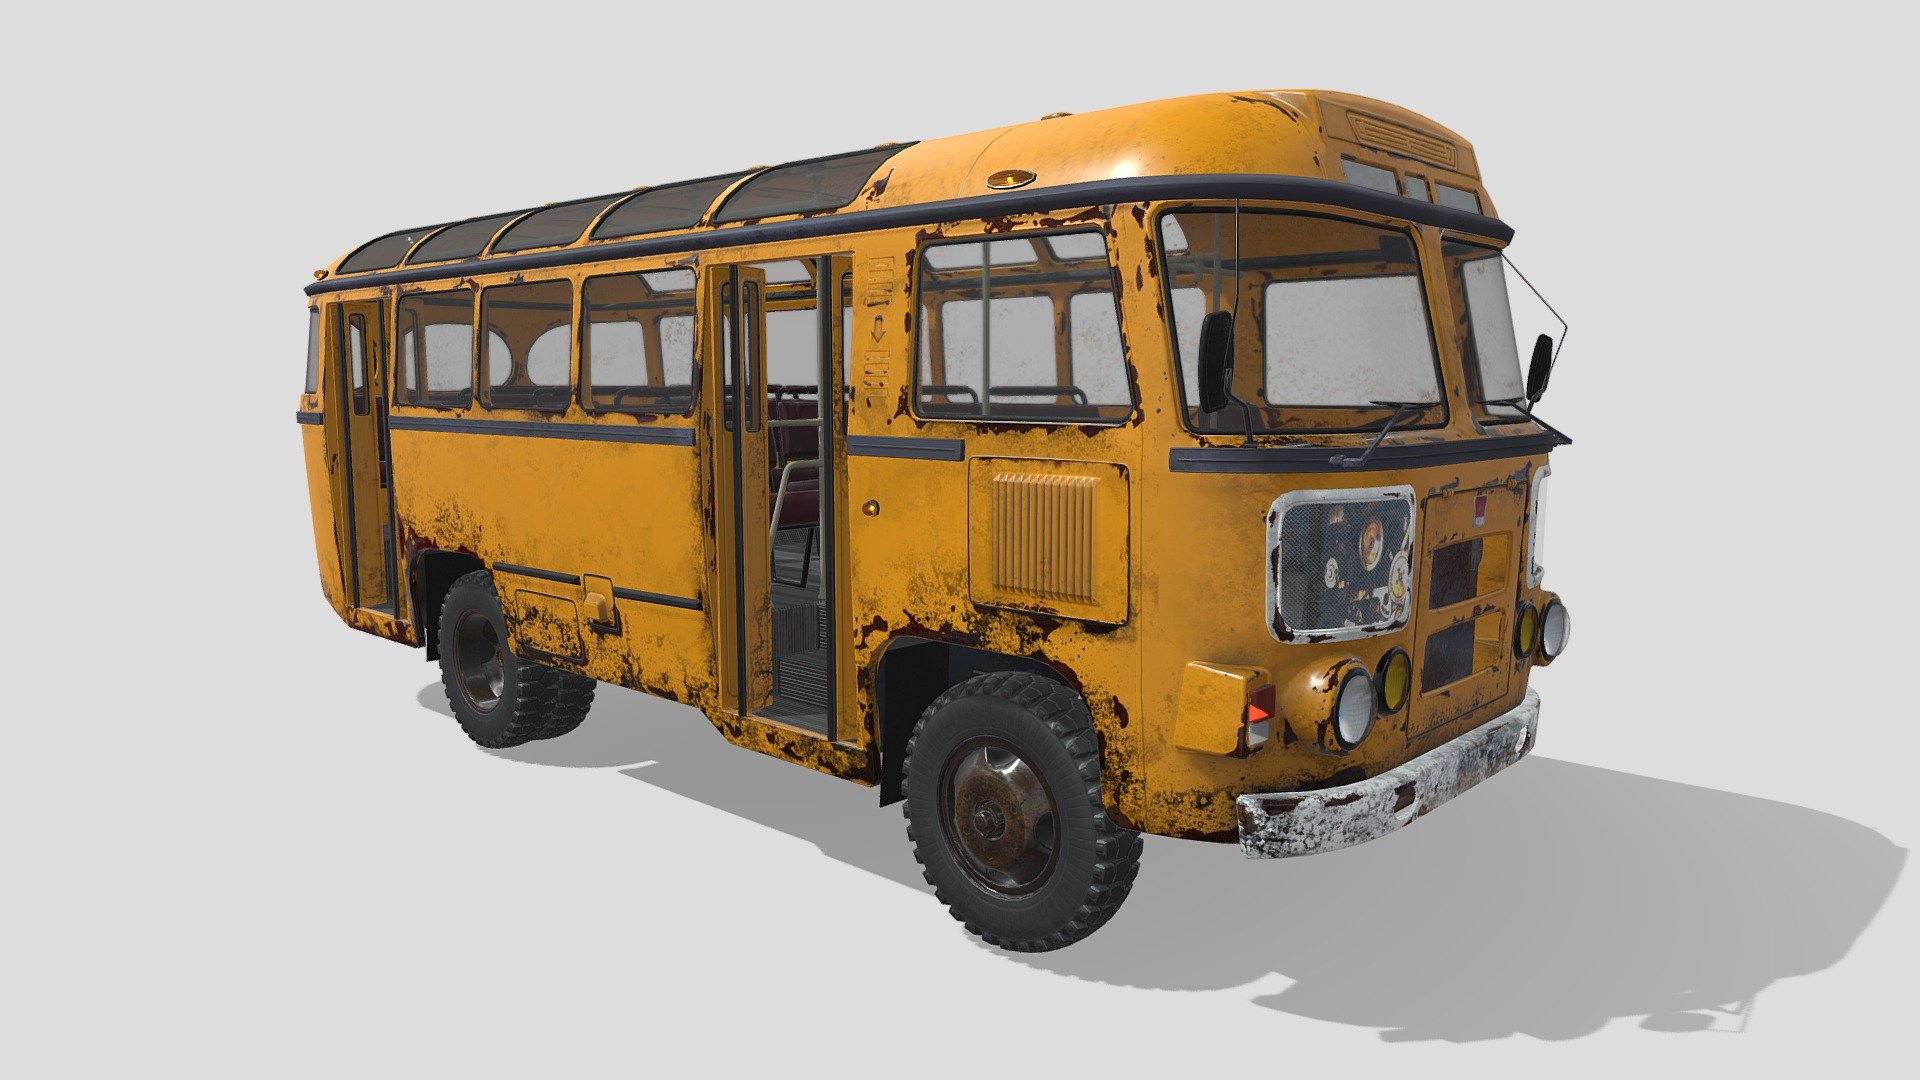 3d model of an old bus made in the USSR
There are diffuse, reflection, refraction, opacity and normal textures
Texture size 81928192, 40964096, 2048 * 2048 and 1024*1024 in the format jpg - Bus PAZ-672 - Buy Royalty Free 3D model by Takoyto 3d model